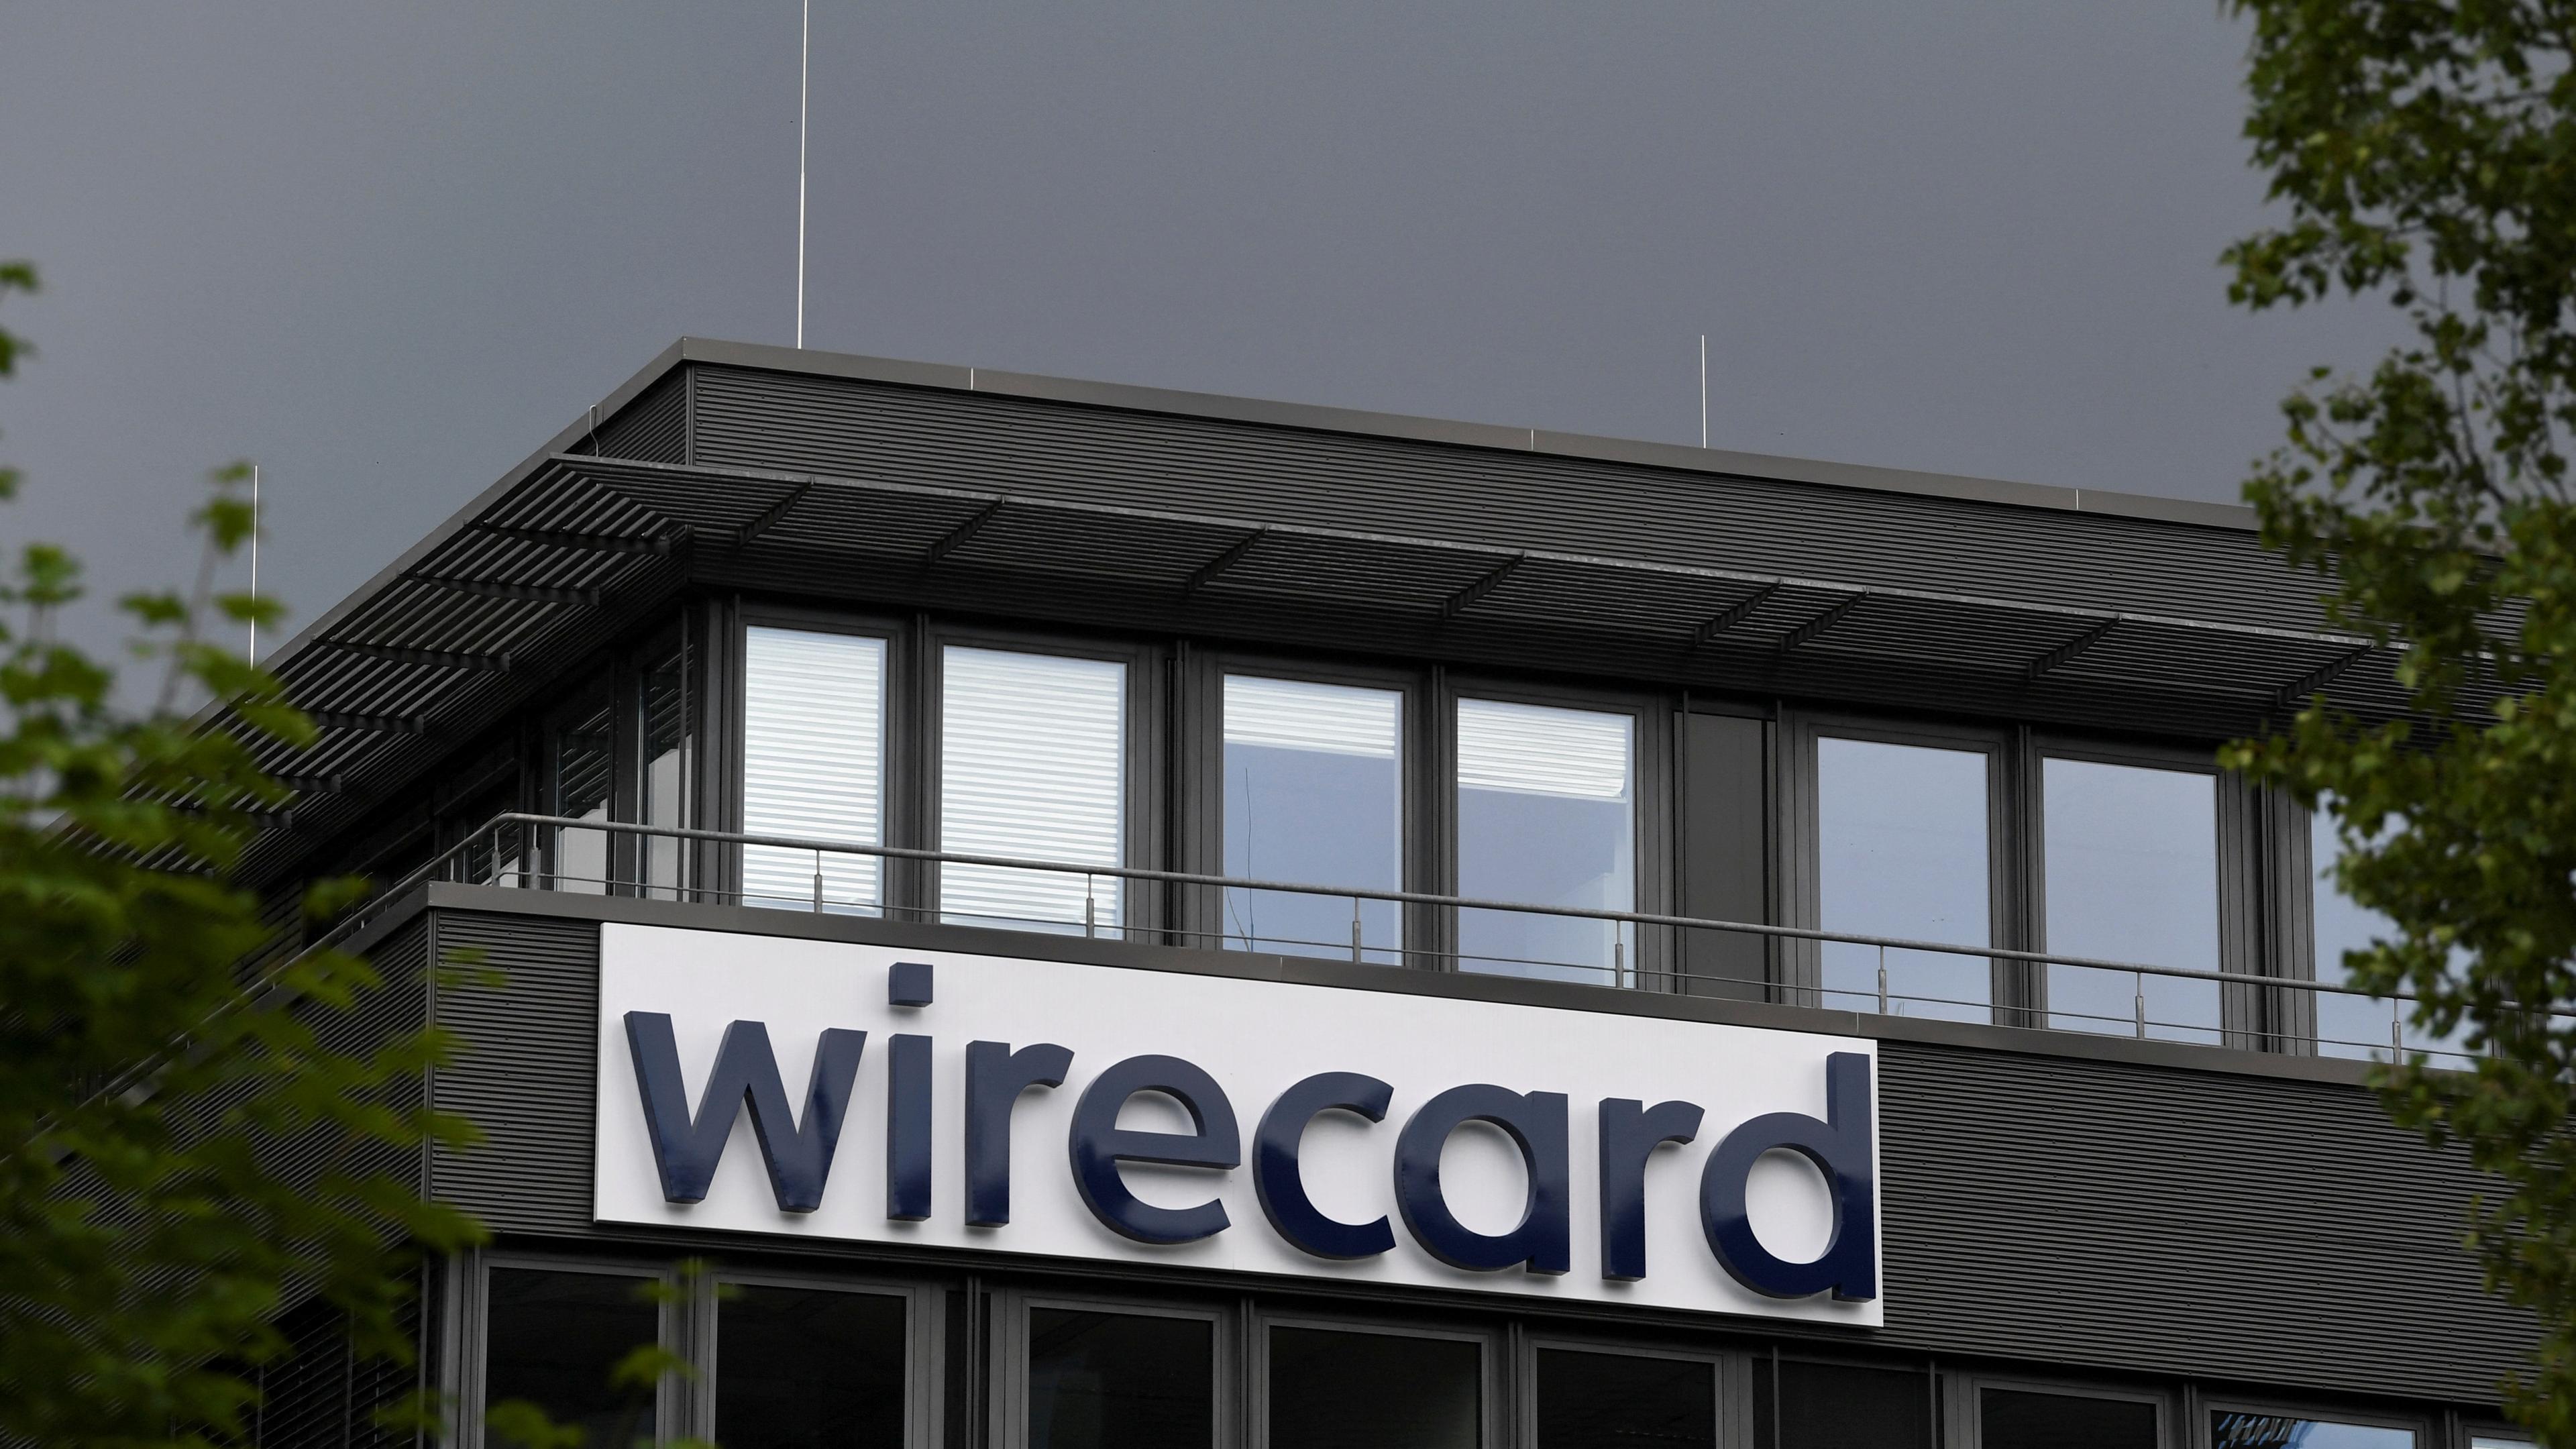 The logo of Wirecard AG, an independent provider of outsourcing and white label solutions for electronic payment transactions, is pictured at its headquarters in Aschheim, near Munich, Germany, July 1, 2020. 